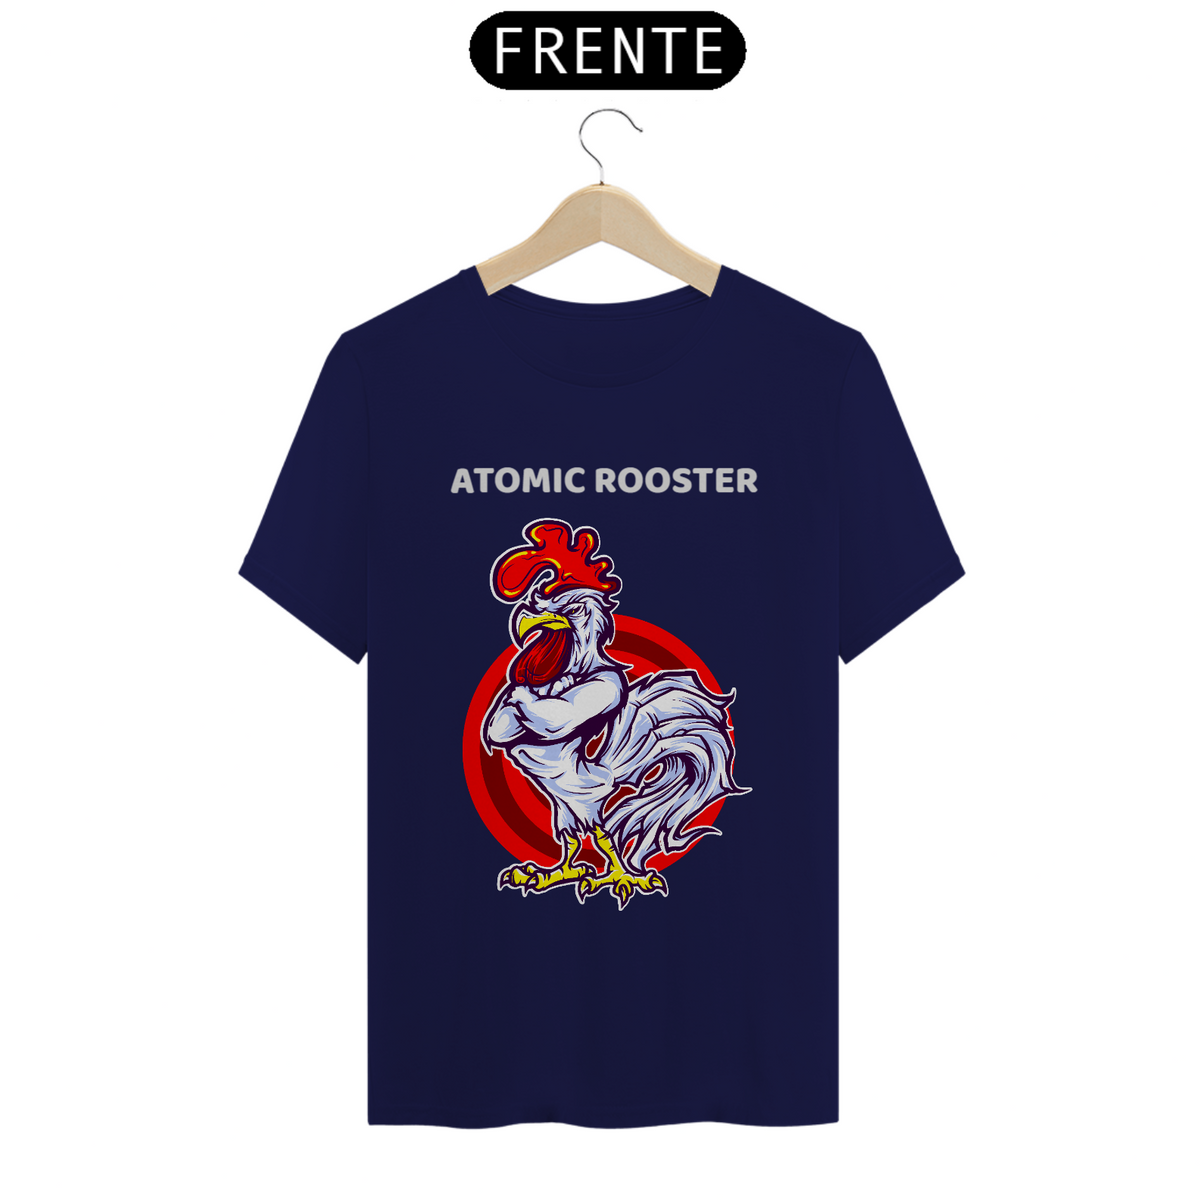 Nome do produto: ATOMIC ROOSTER